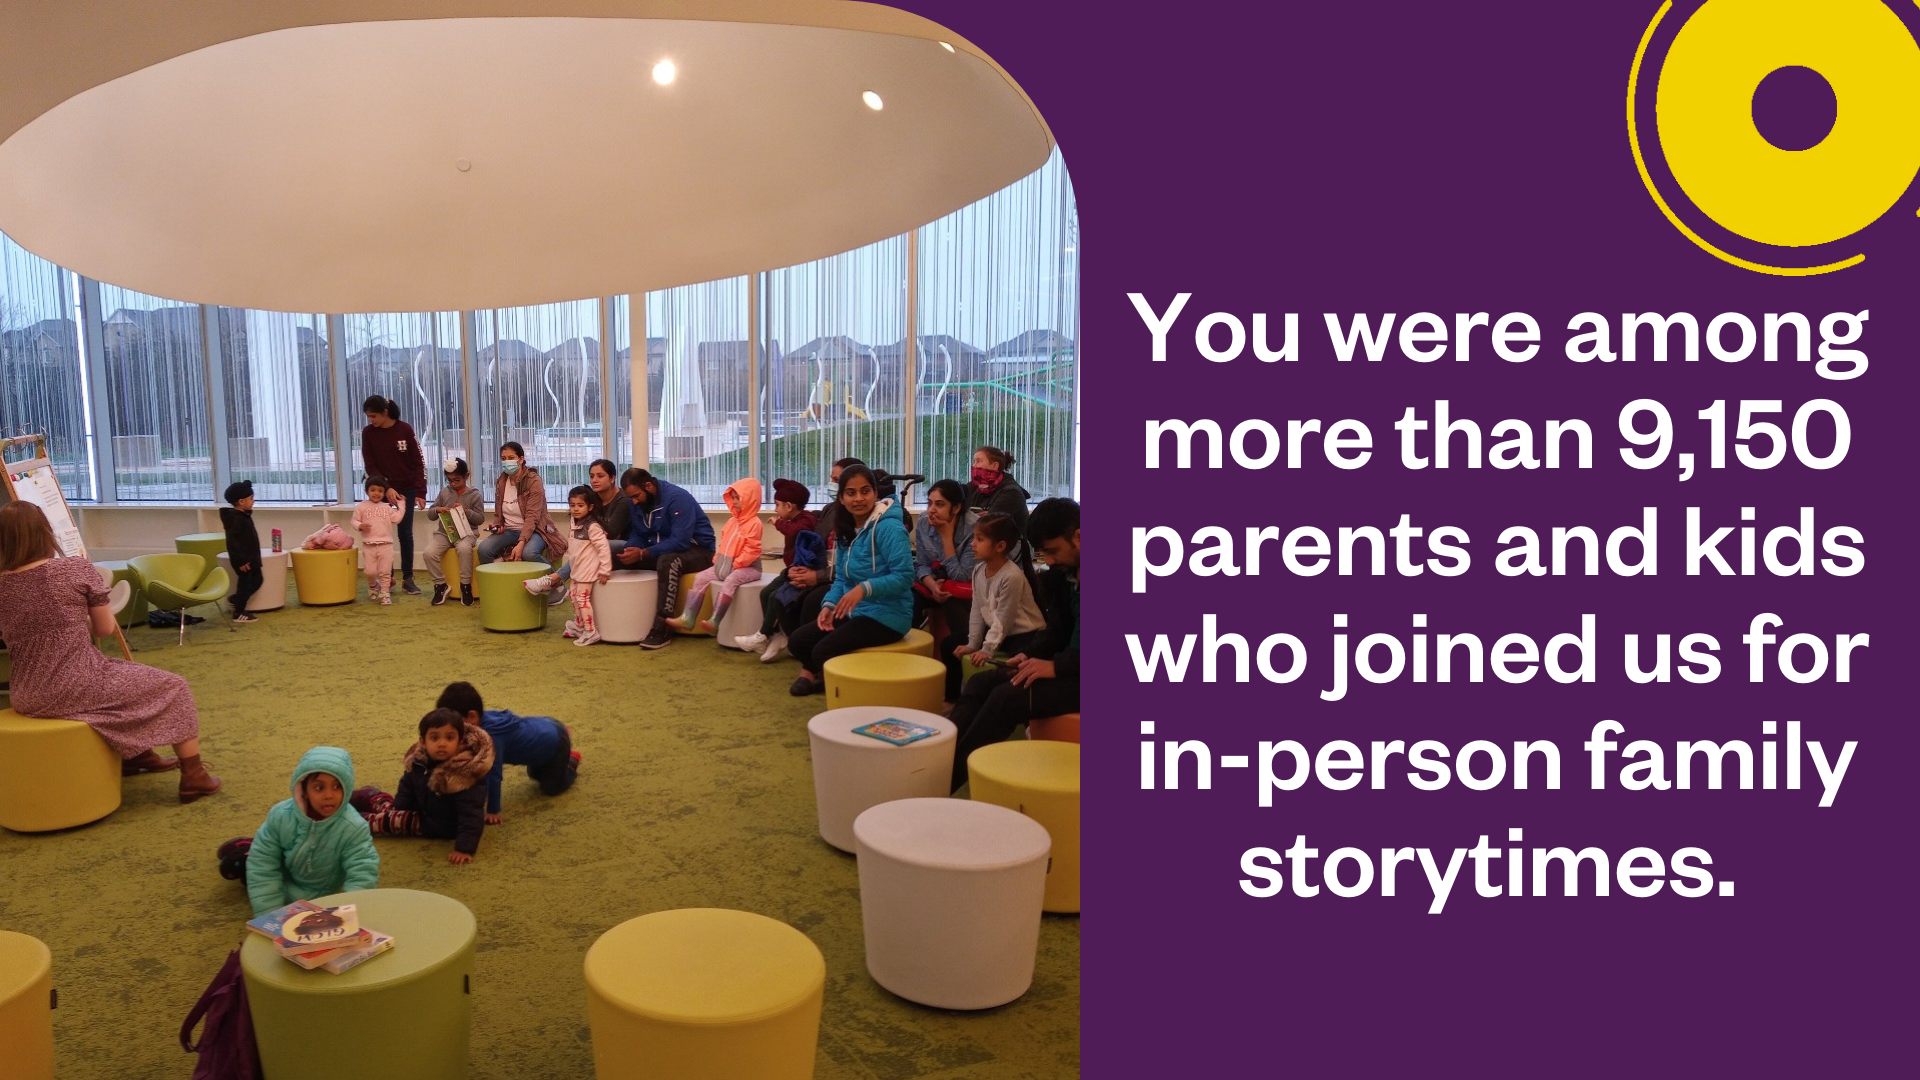 you were among more than 9,150 parents and kids who joined us for in-person family storytime.